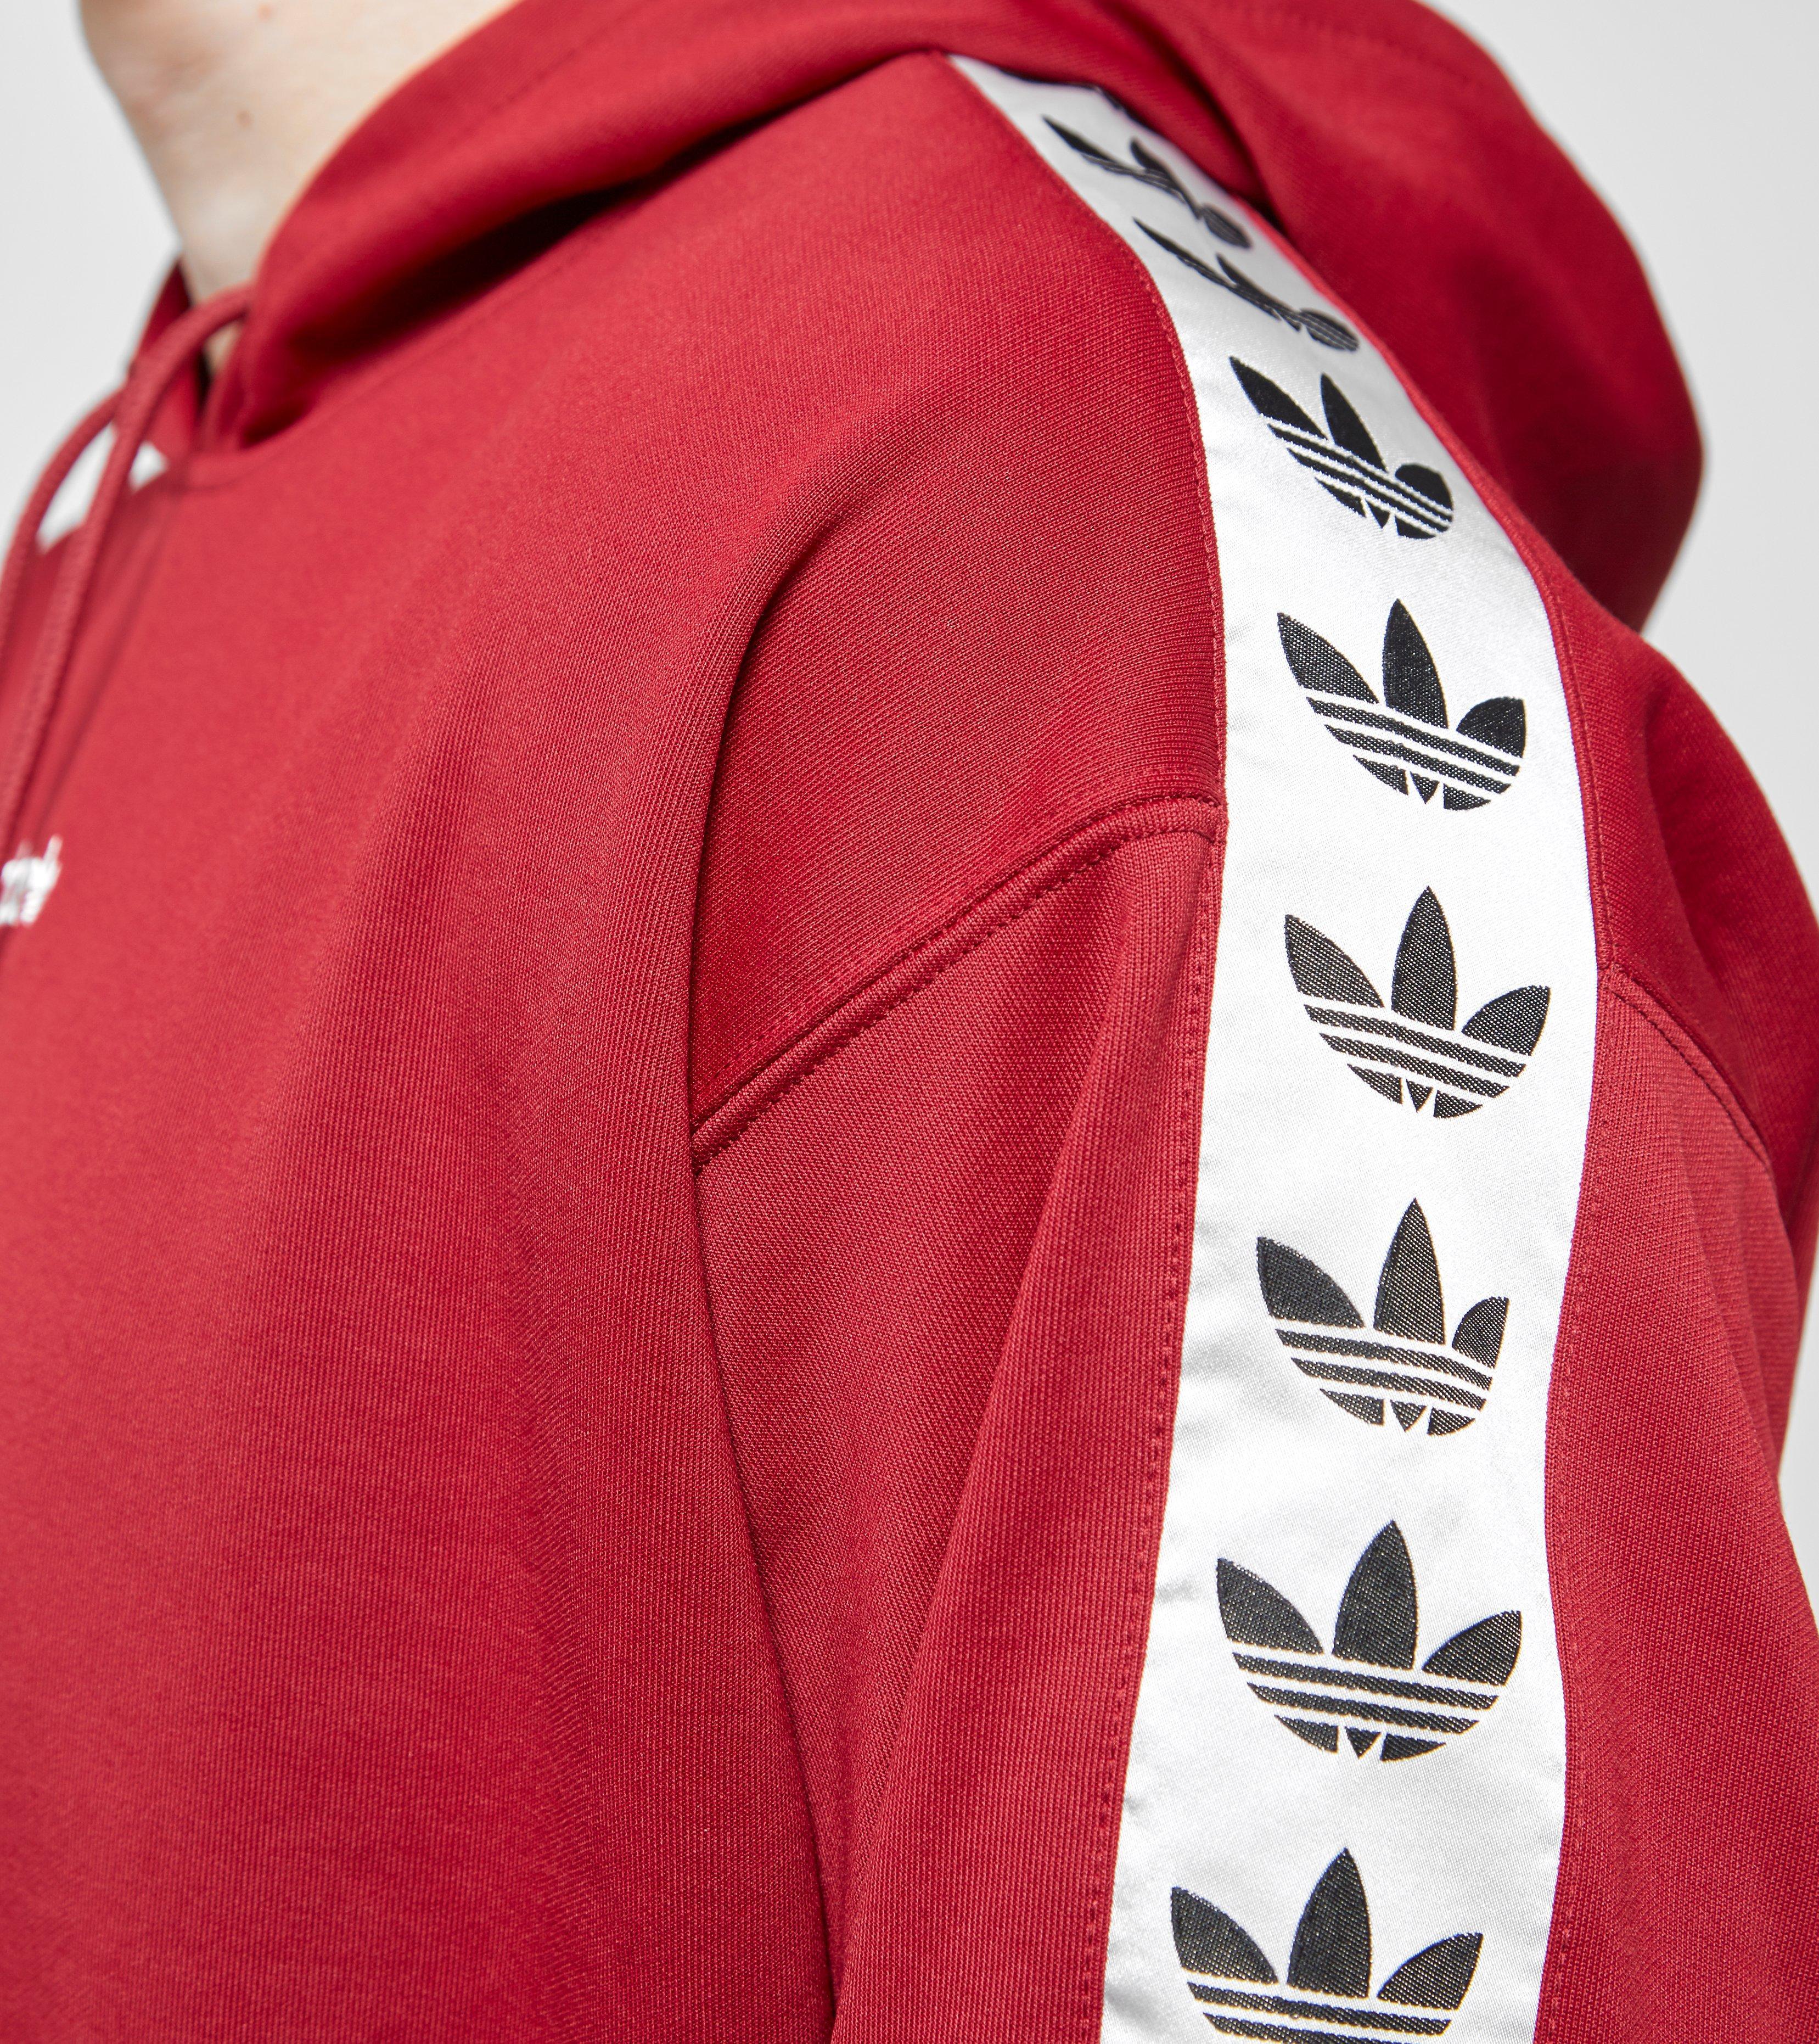 red adidas hoodie mens Online Shopping for Women, Men, Kids Fashion &  Lifestyle|Free Delivery & Returns! -